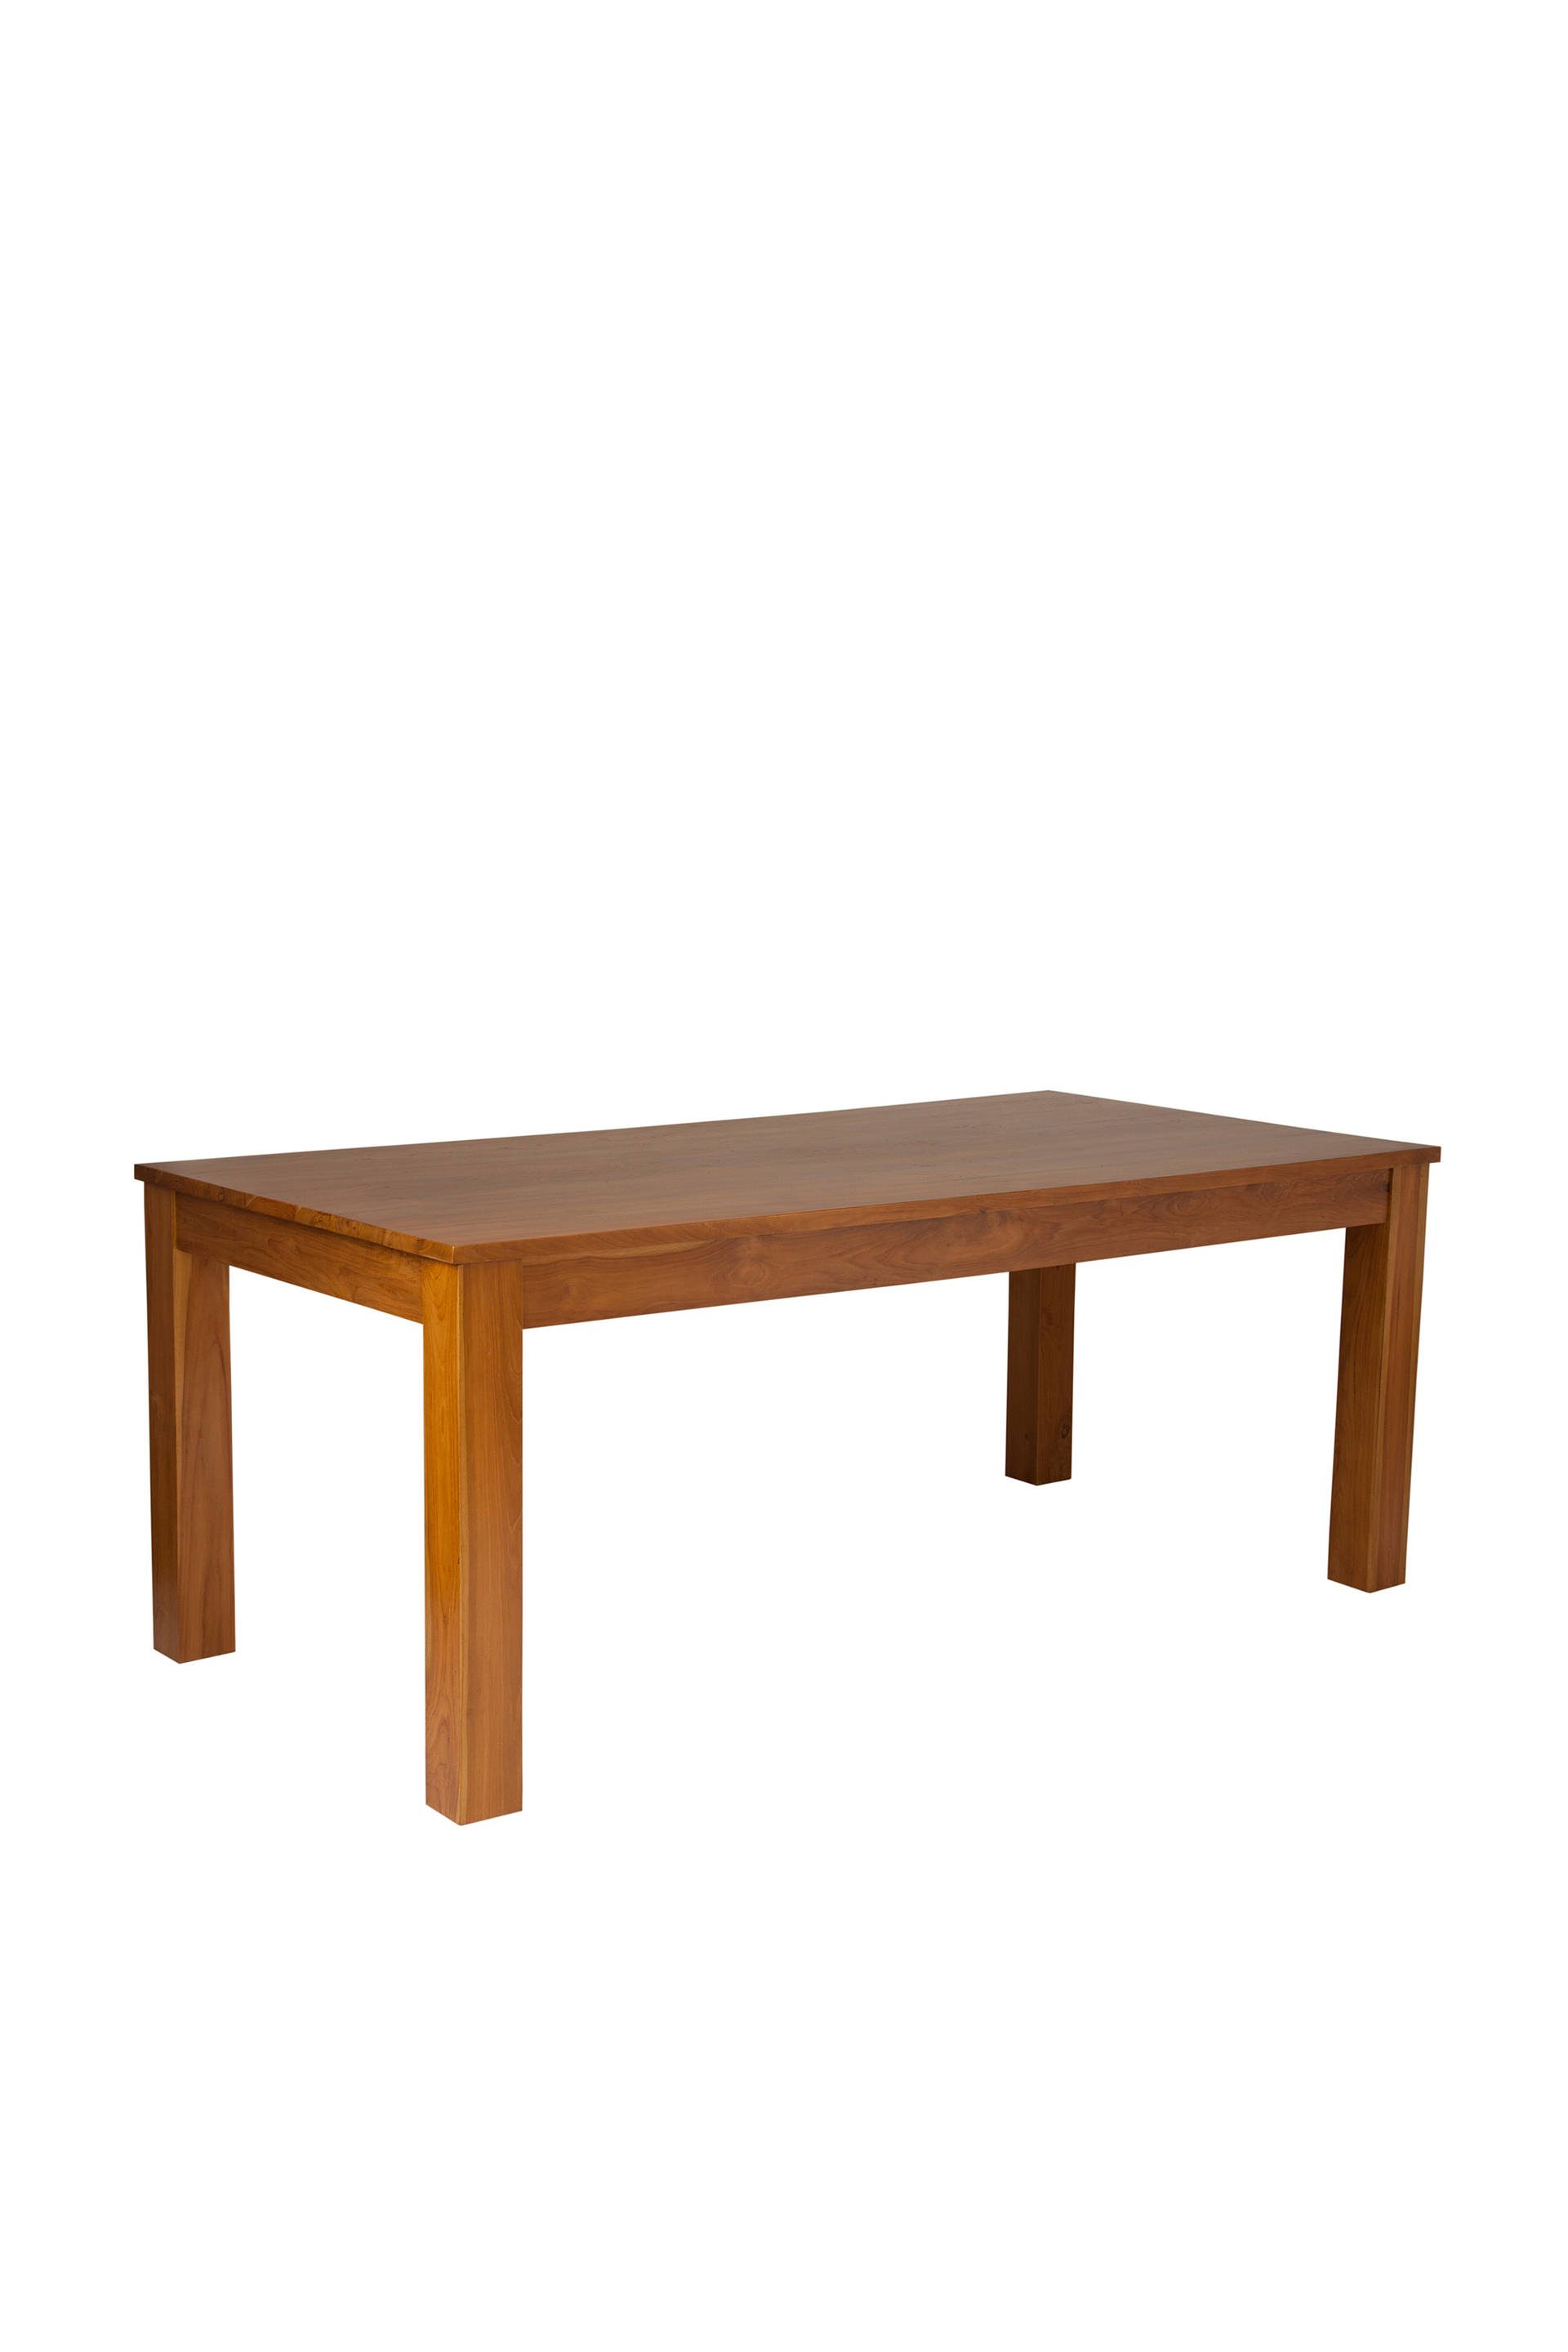 STRAIGHT DINING TABLE 200